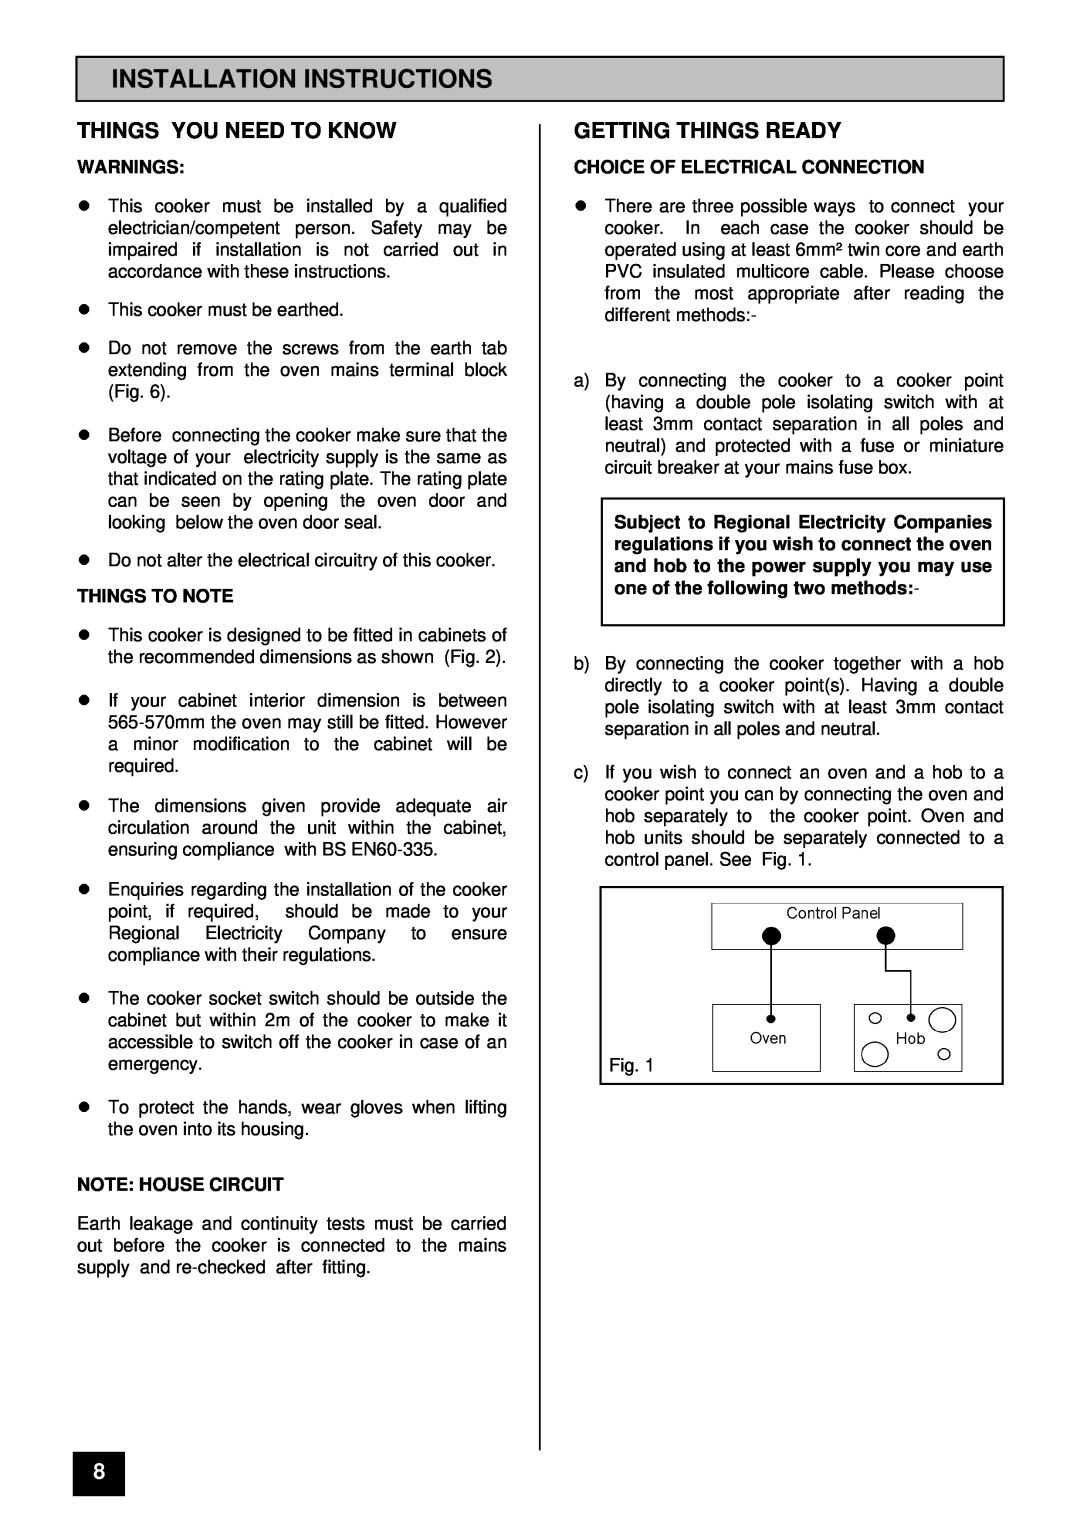 Tricity Bendix BD 912/2 Installation Instructions, Things You Need To Know, Getting Things Ready, Warnings, Things To Note 